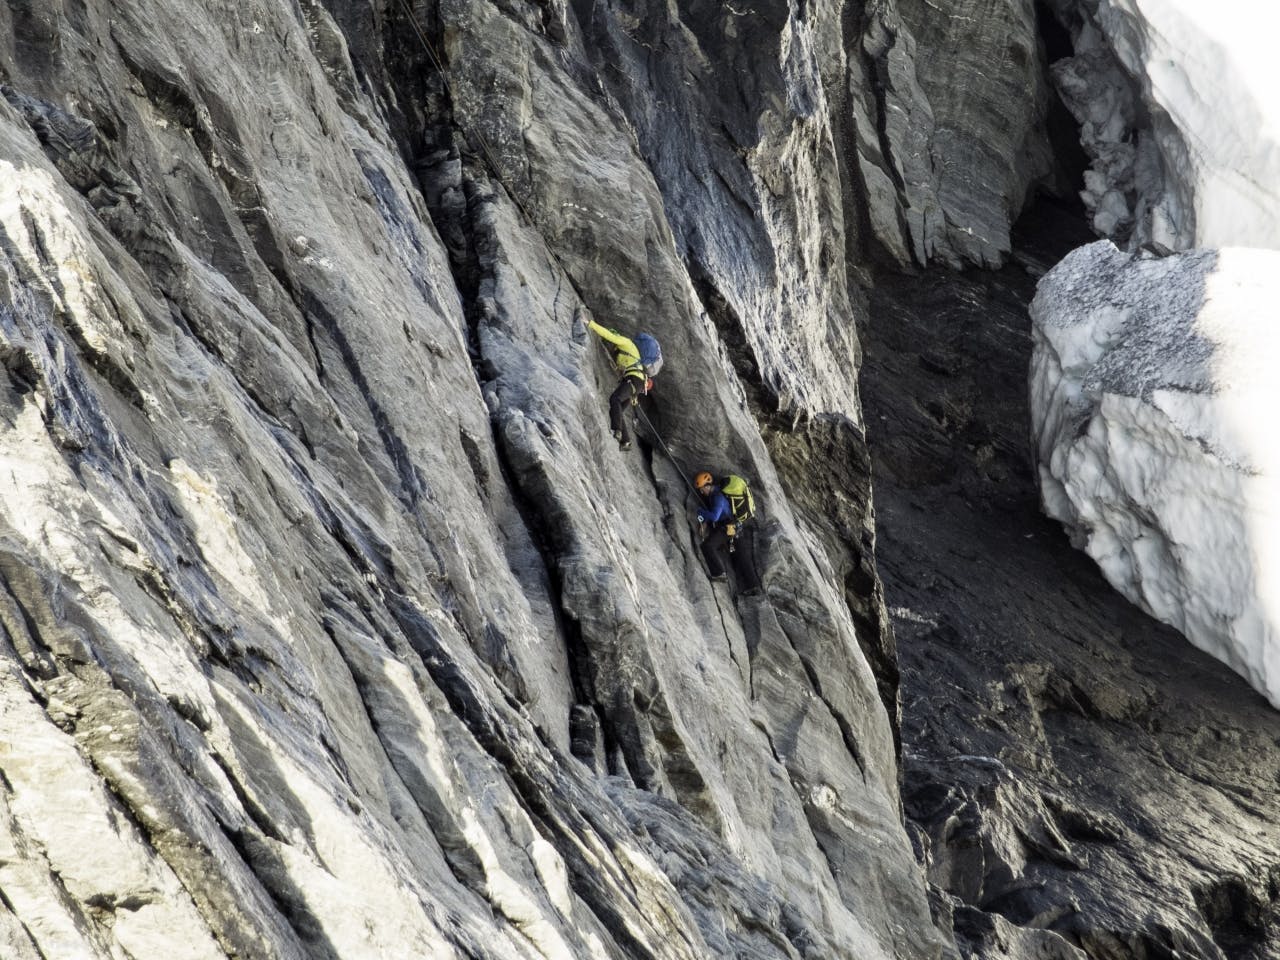 Ben Dare and Danny Murphy on the second pitch of the climb. Photo: Steve Skelton 